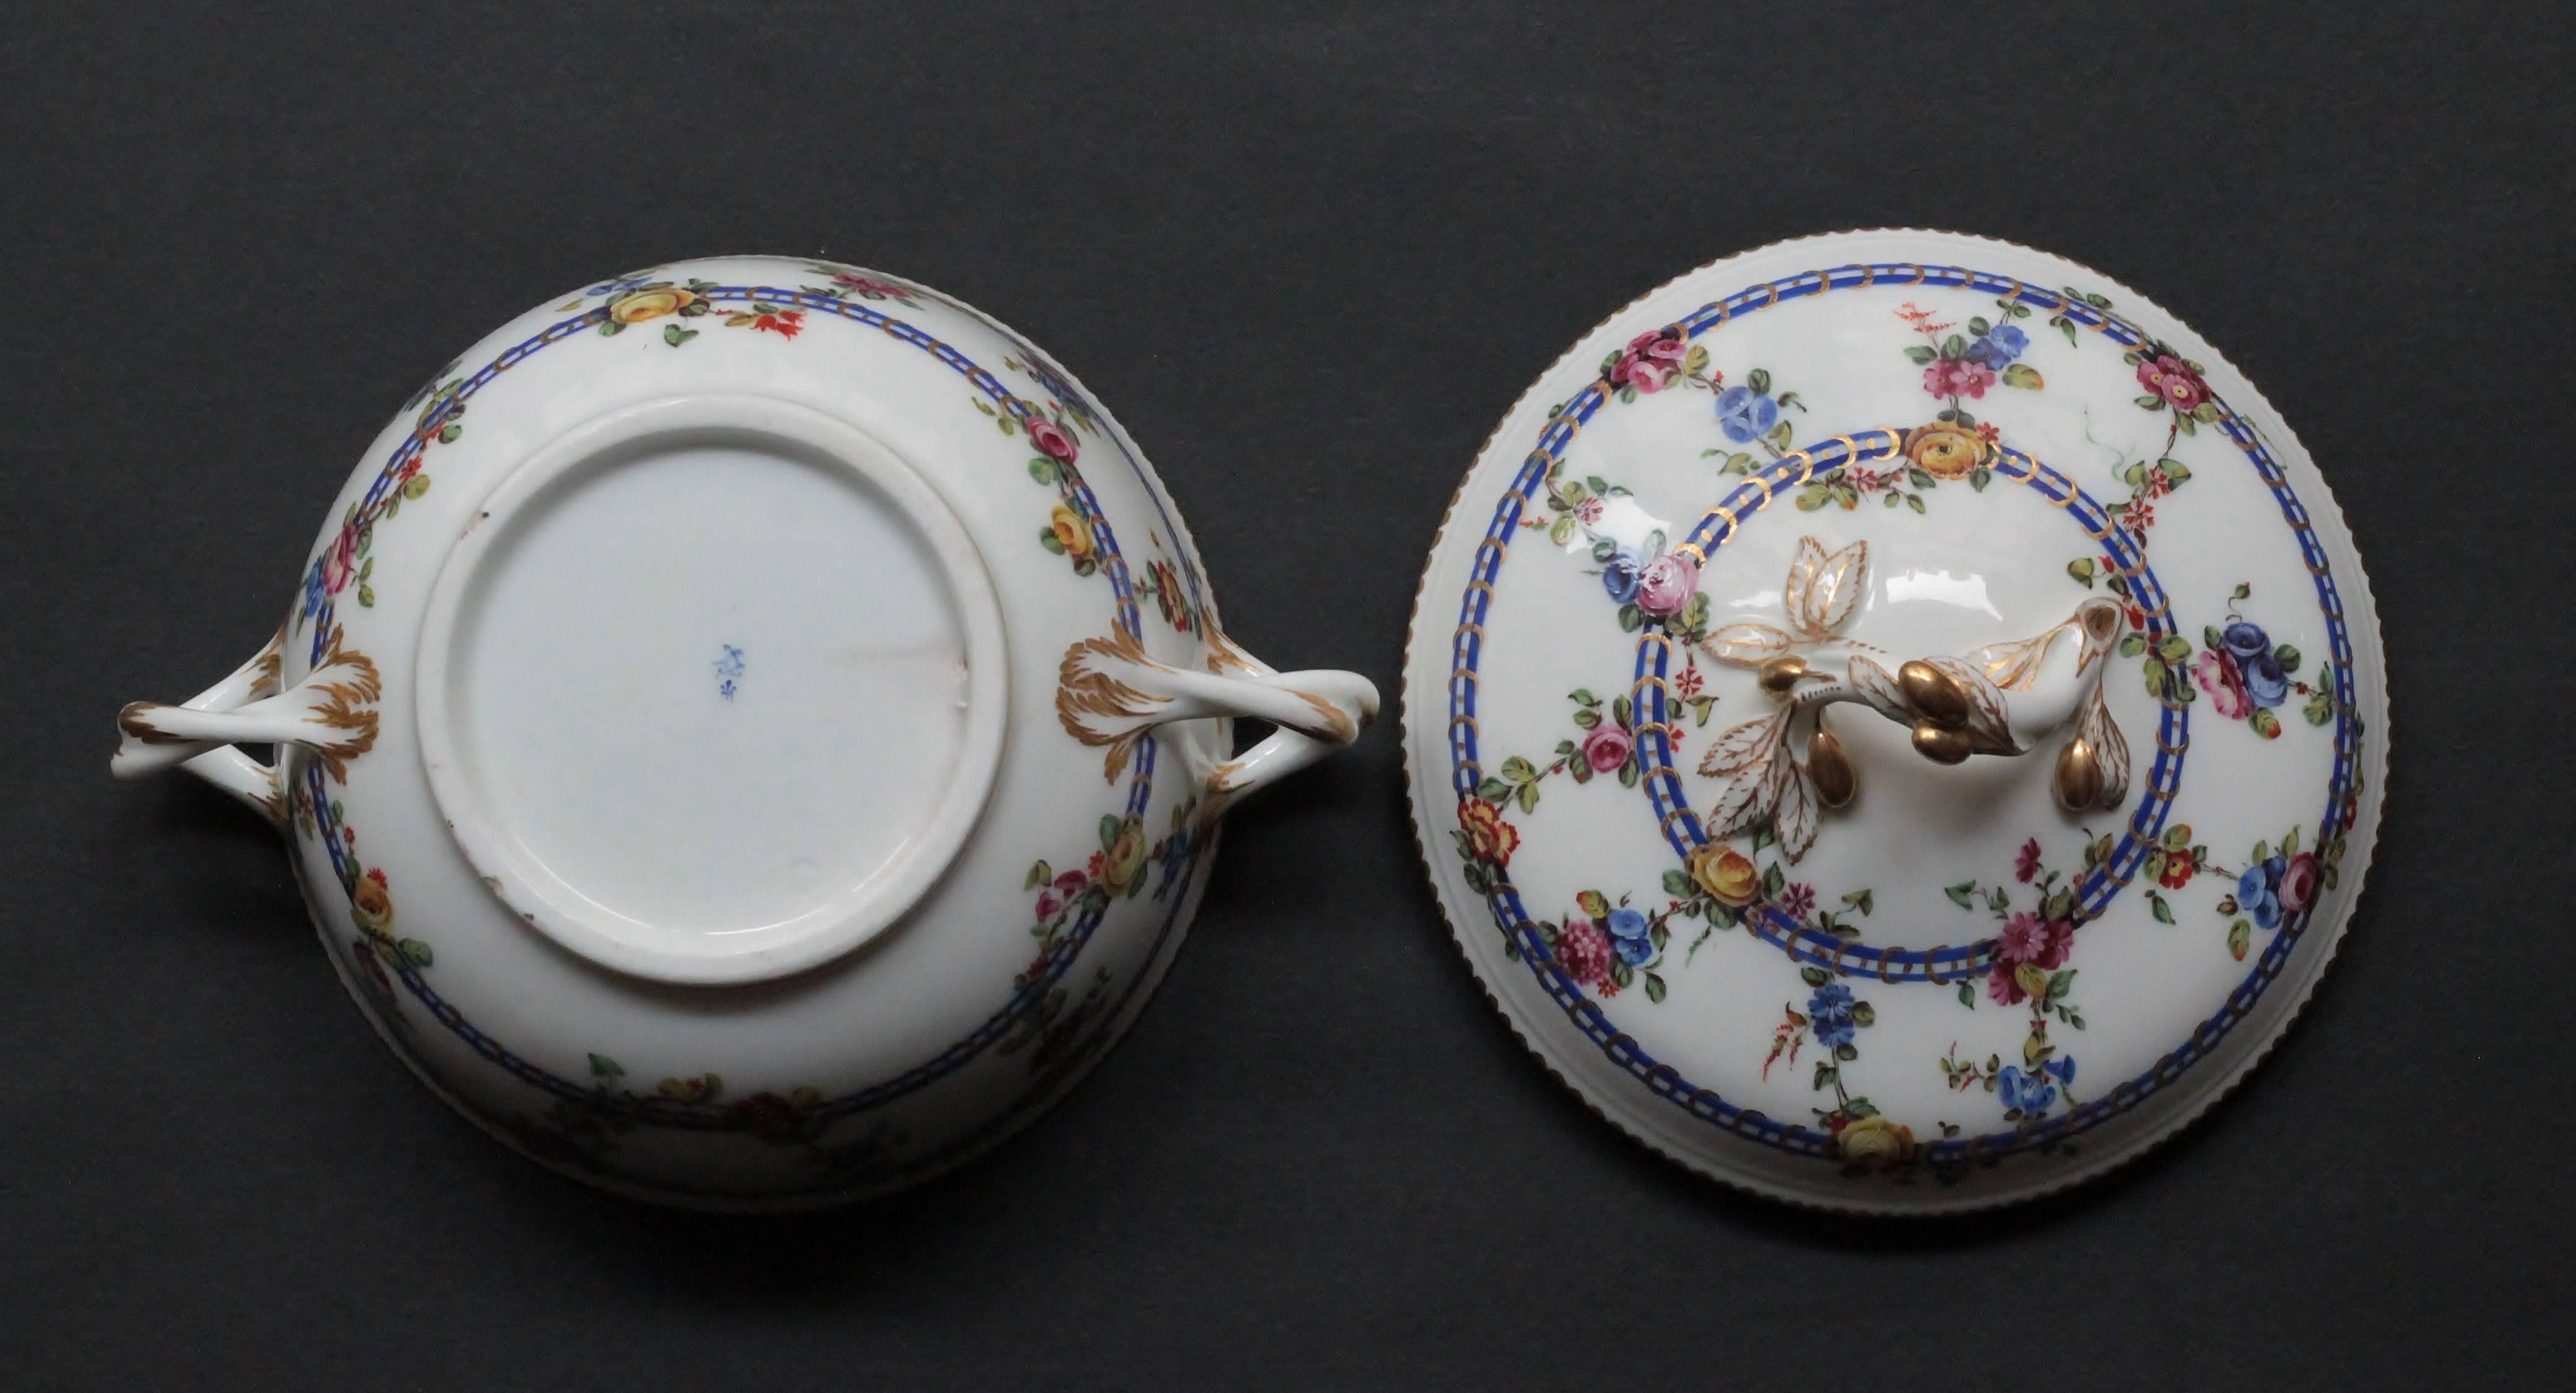 French Sevres Porcelain Circular Ecuelle, Cover and Stand, circa 1760-1765